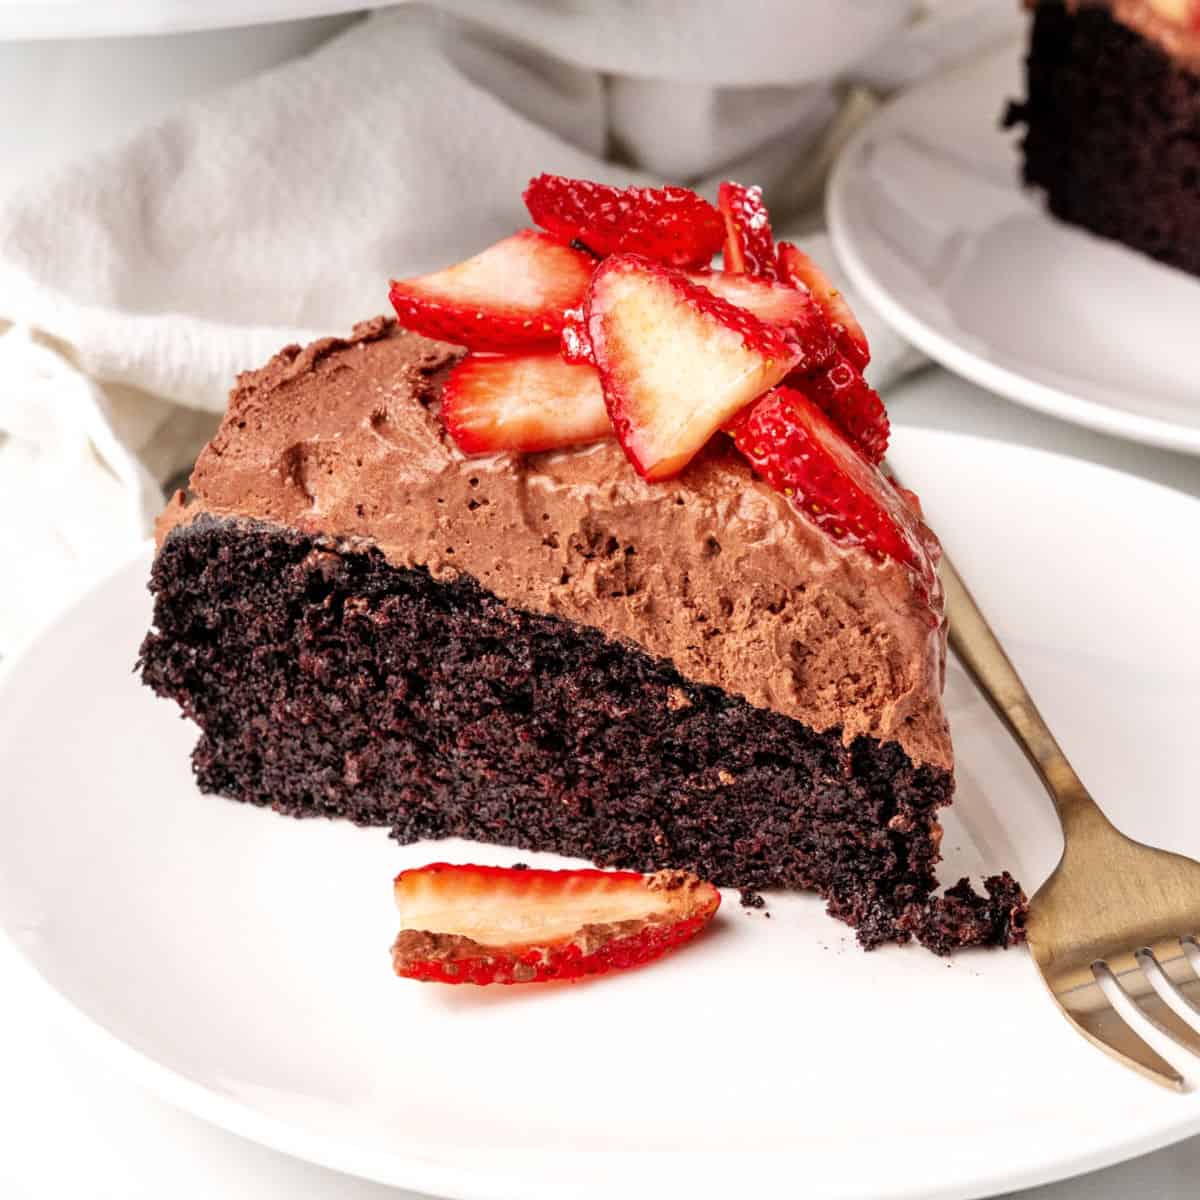 Slice of strawberry topped chocolate mousse cake on a white plate with a fork.